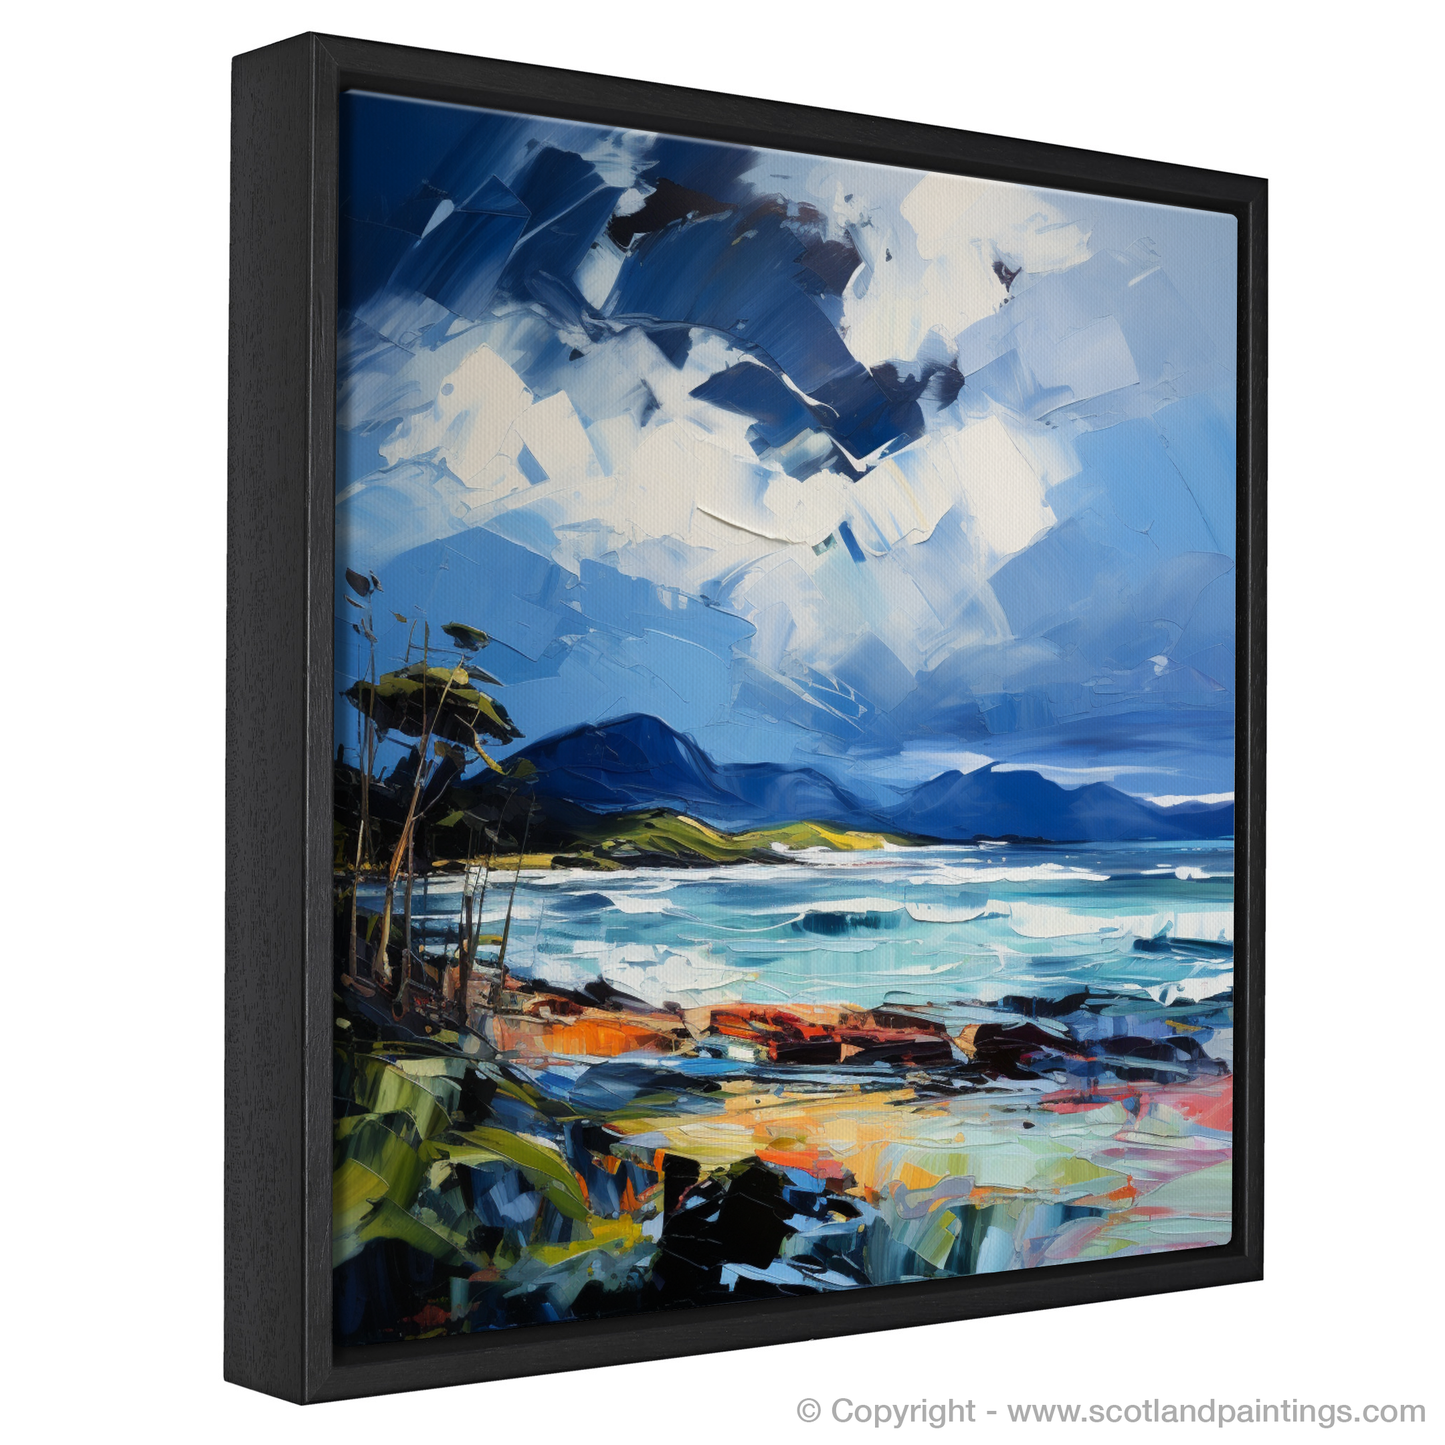 Painting and Art Print of Ardalanish Bay with a stormy sky entitled "Storm over Ardalanish Bay: An Expressionist Ode to Scotland's Rugged Coast".